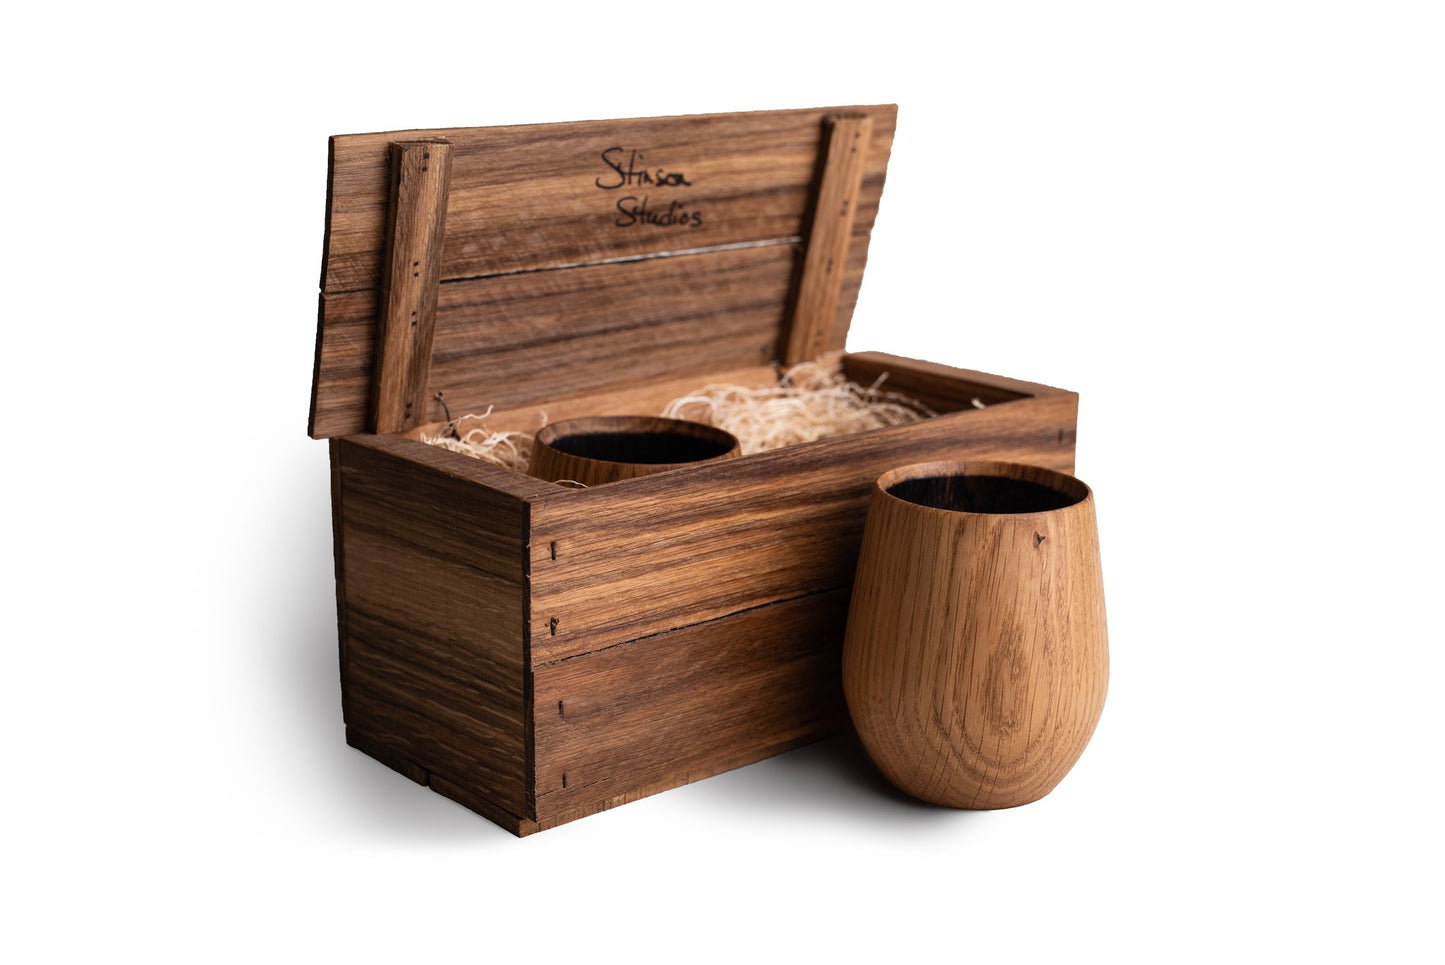 Wooden gift crate of two Charred Oak Whiskey Tumblers, made in Canada by Stinson Studios.